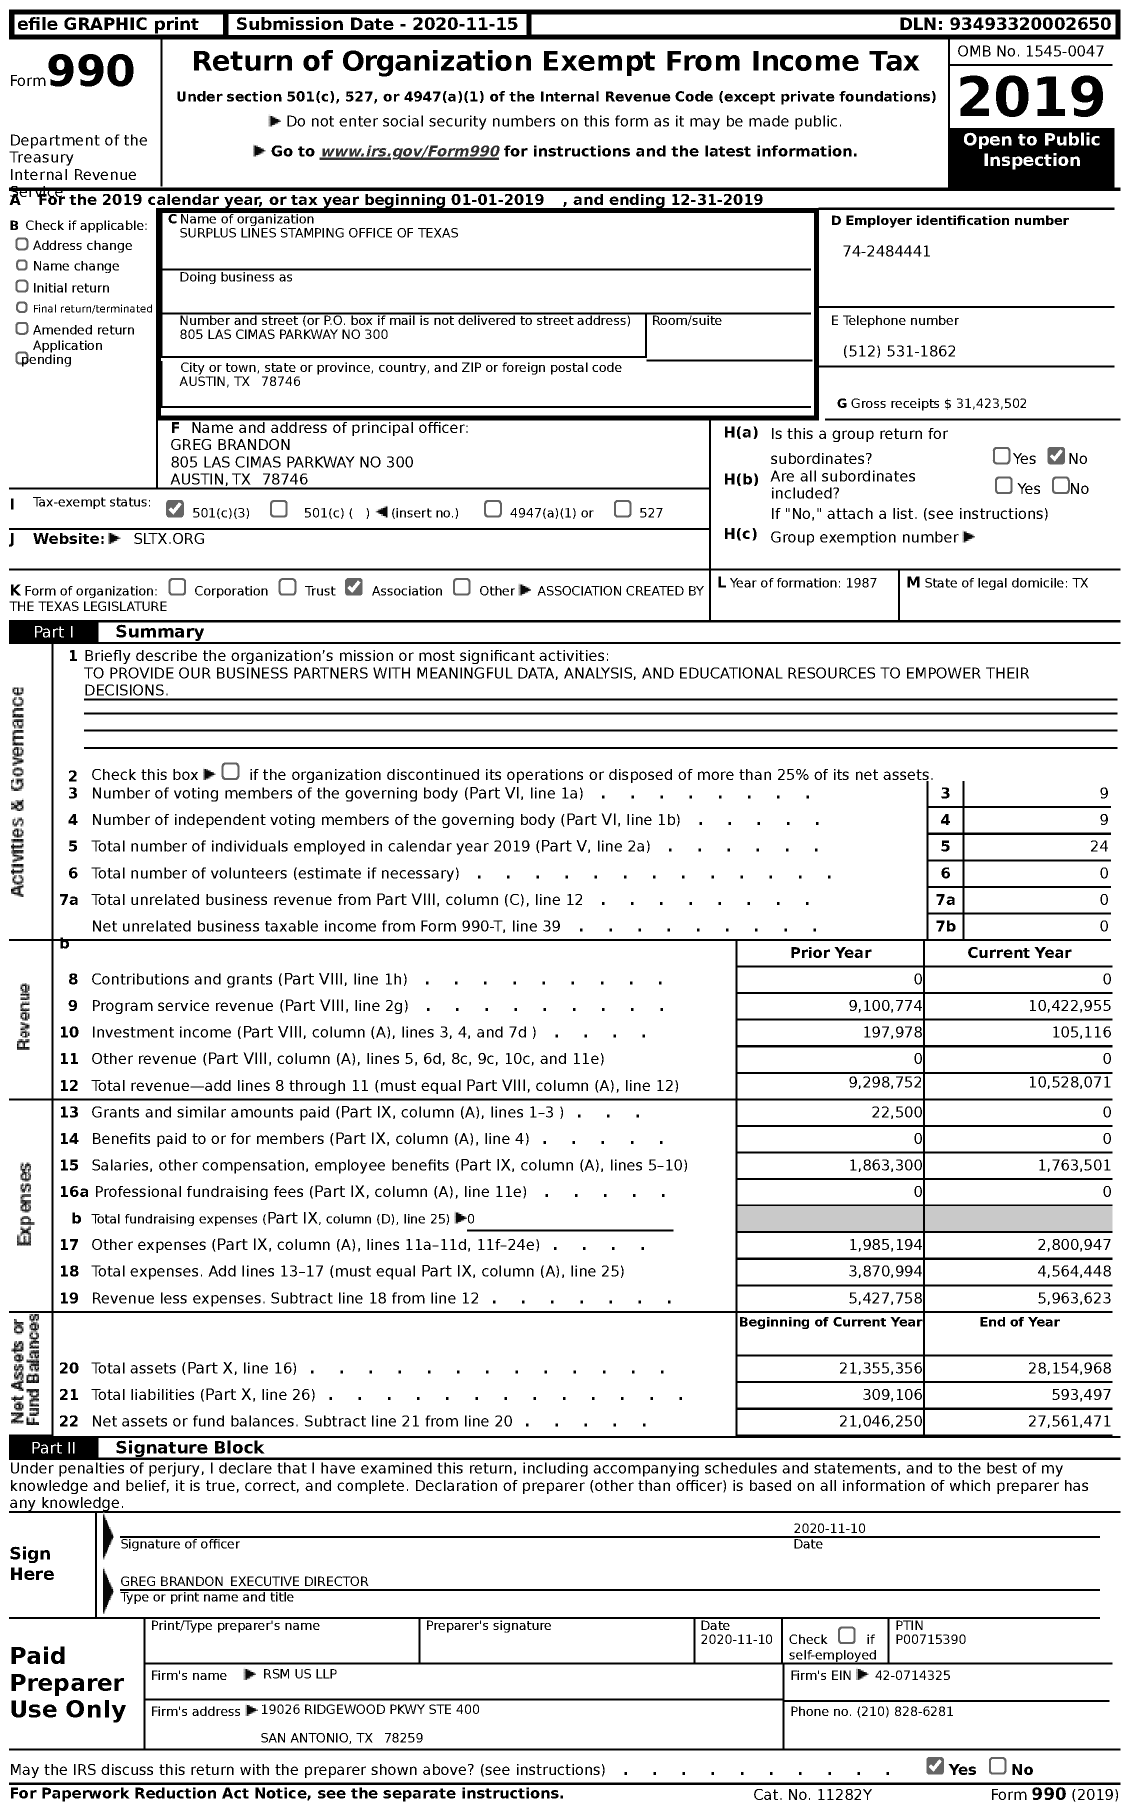 Image of first page of 2019 Form 990 for Surplus Lines Stamping Office of Texas (SLSOT)